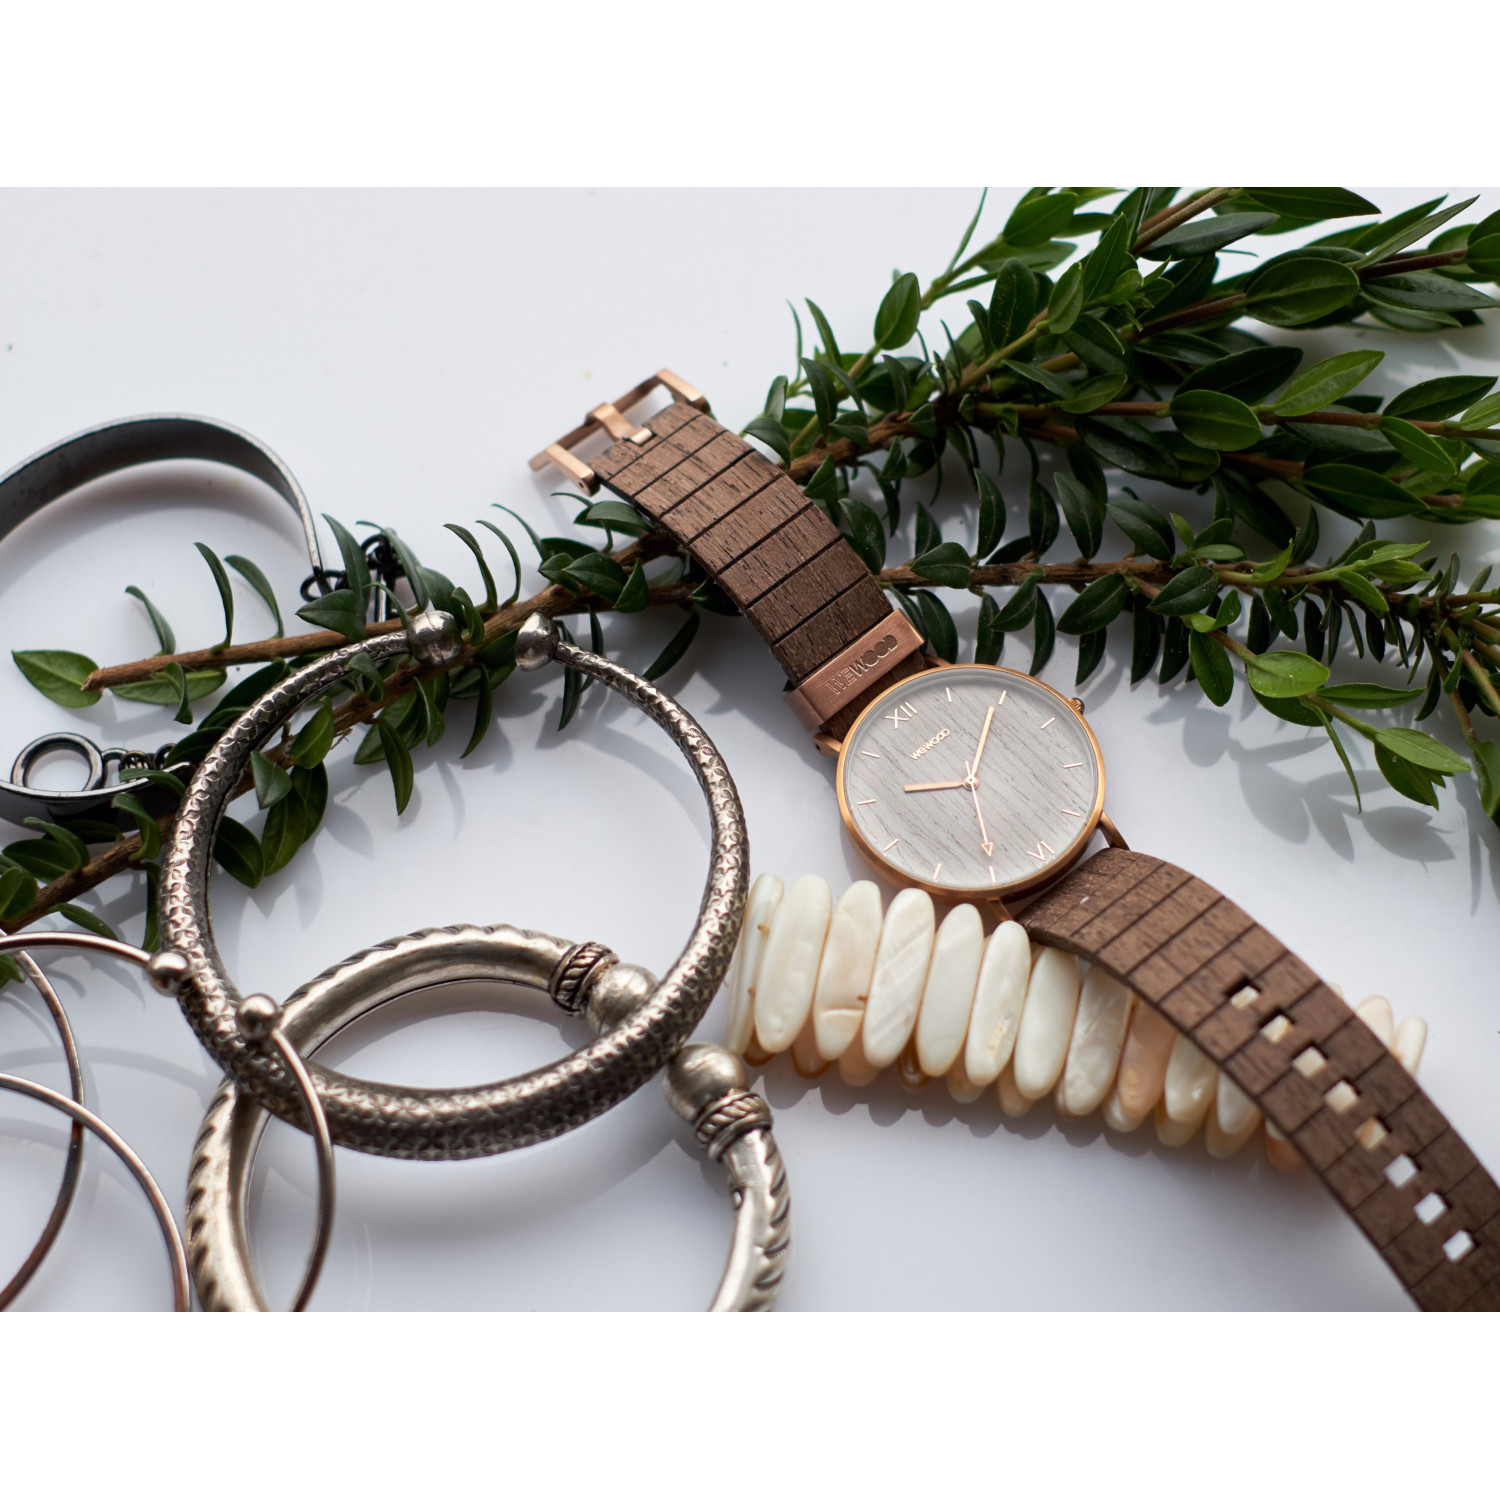 Montre Wewood Aurora Rose Gold Apricot